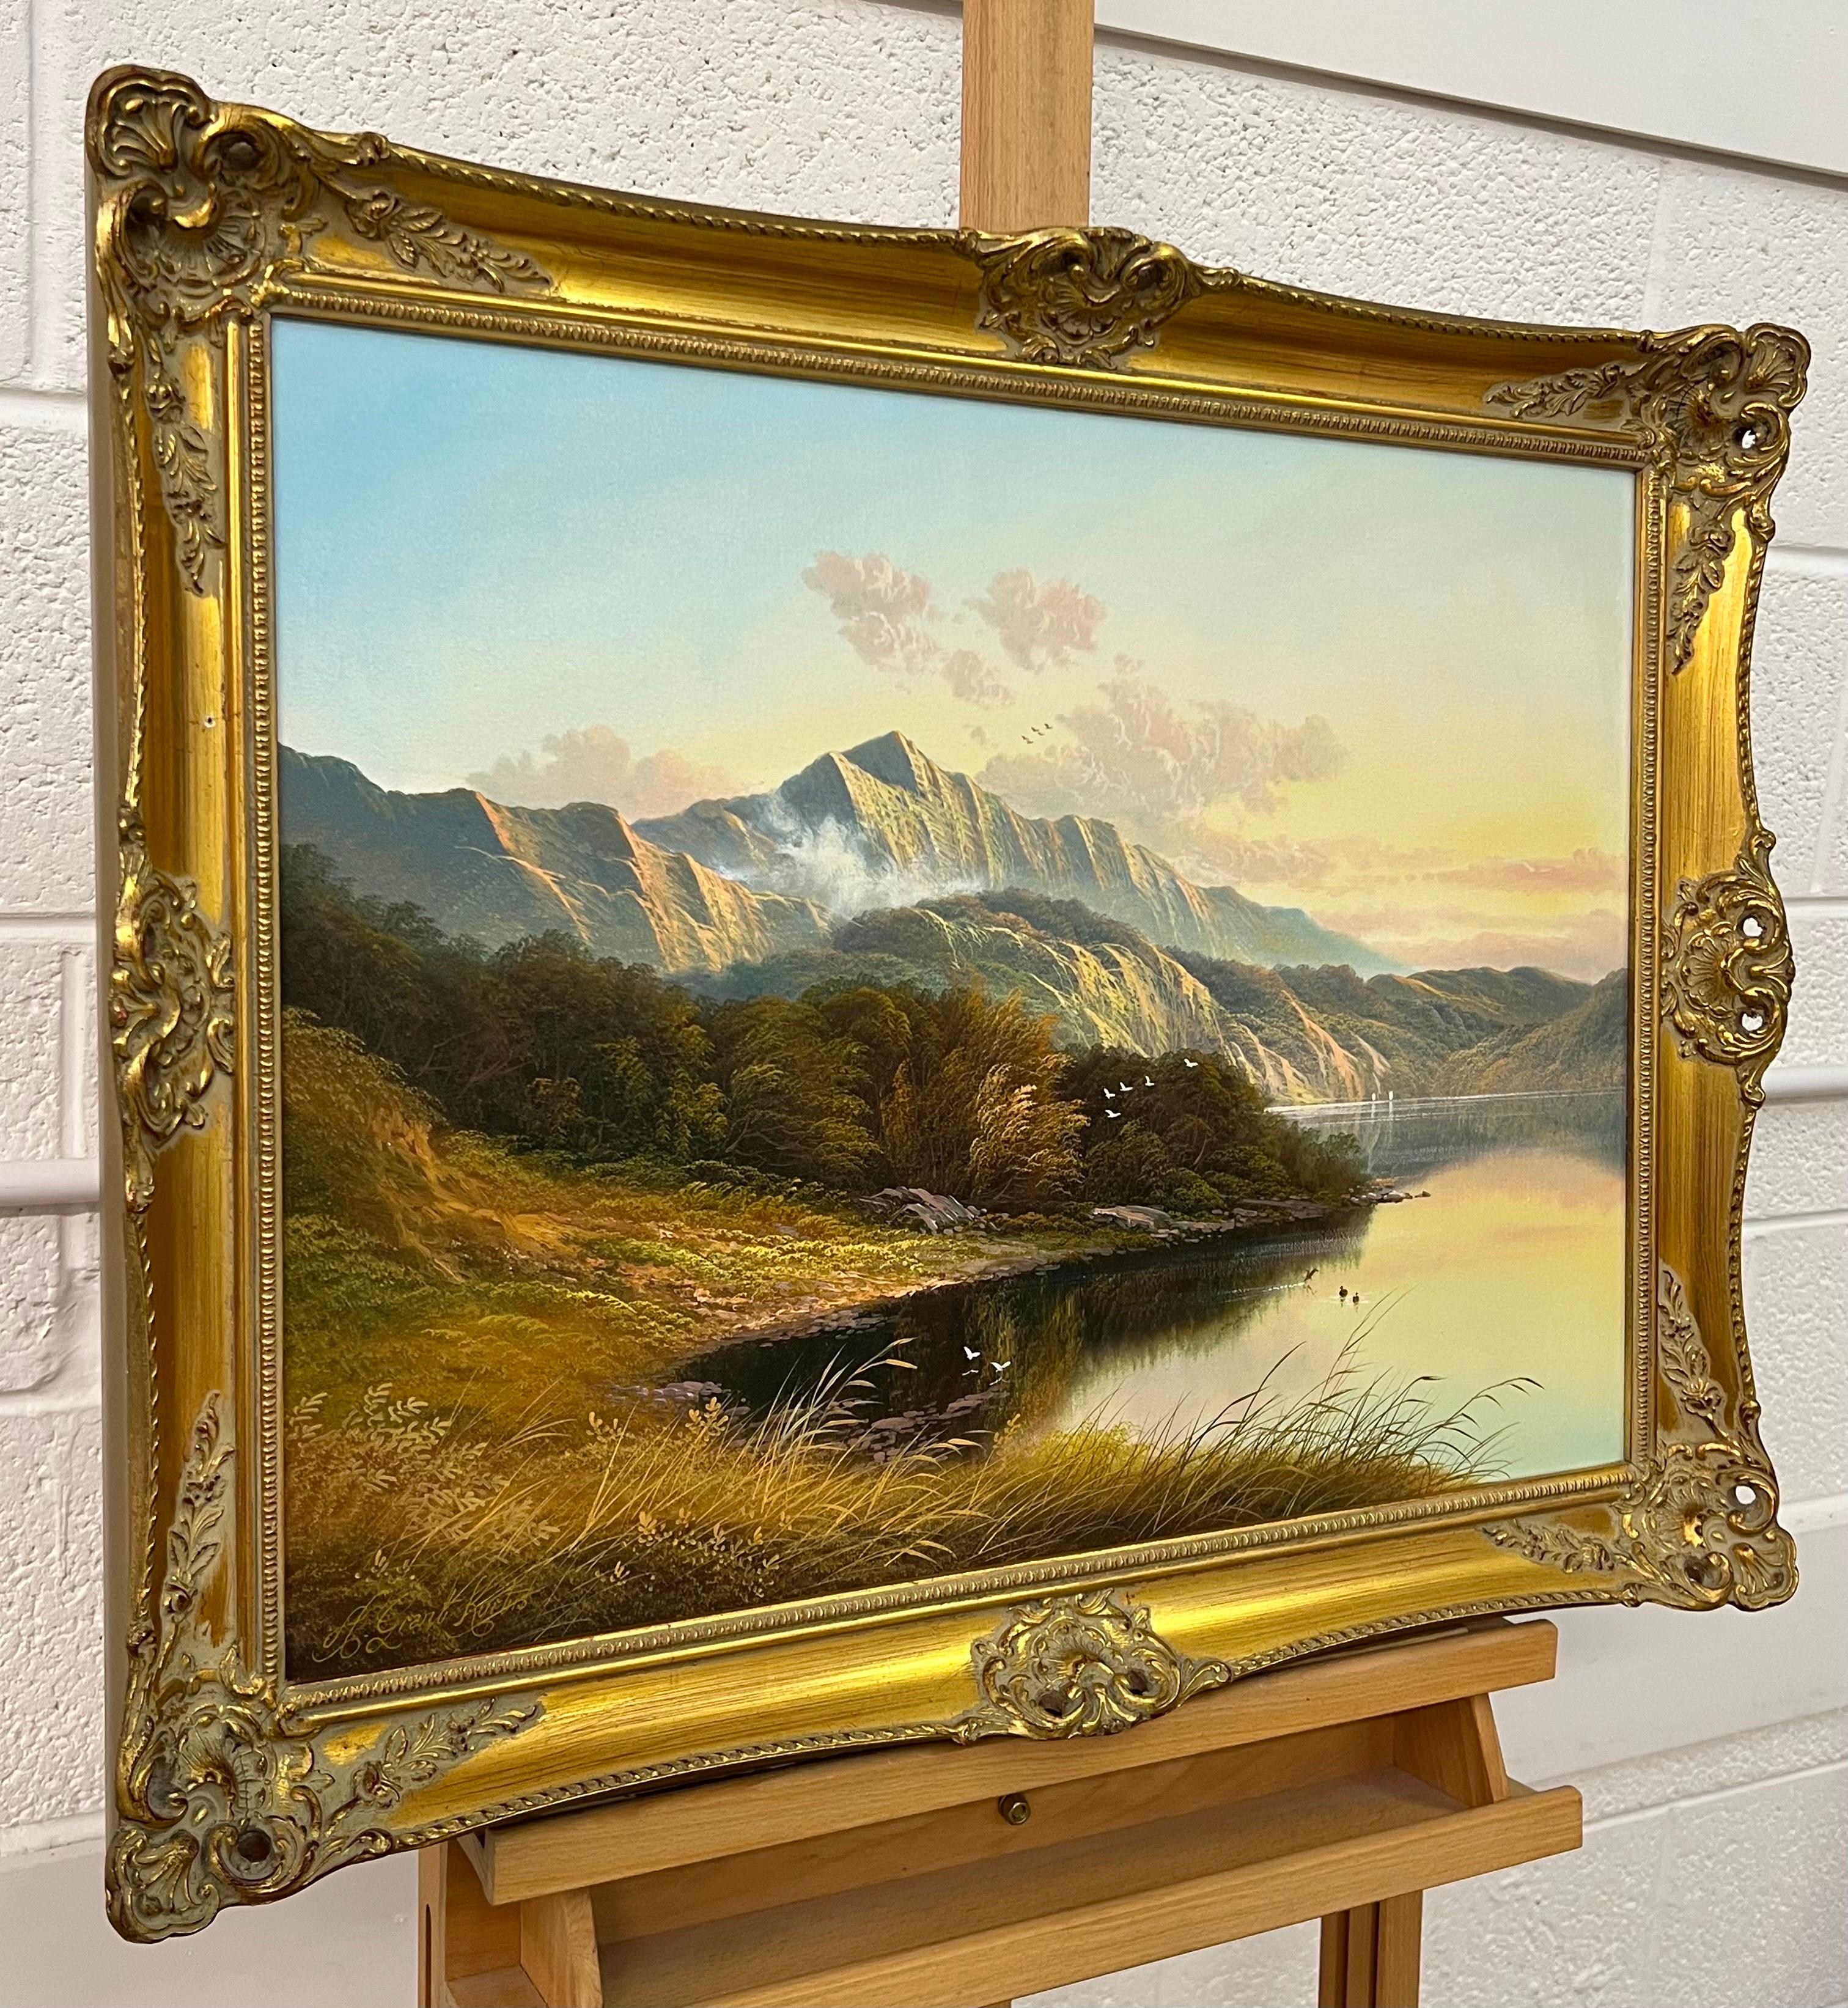 Mountain Lake Oil Painting of a Loch in the Scottish Highlands by British Artist, Andrew Grant Kurtis M.A.(Lon) B.Des.(Hons) L.S.I.A.D.

Art measures 24 x 18 inches 
Frame measures 29 x 23 inches 

As an artist of both classical and traditional